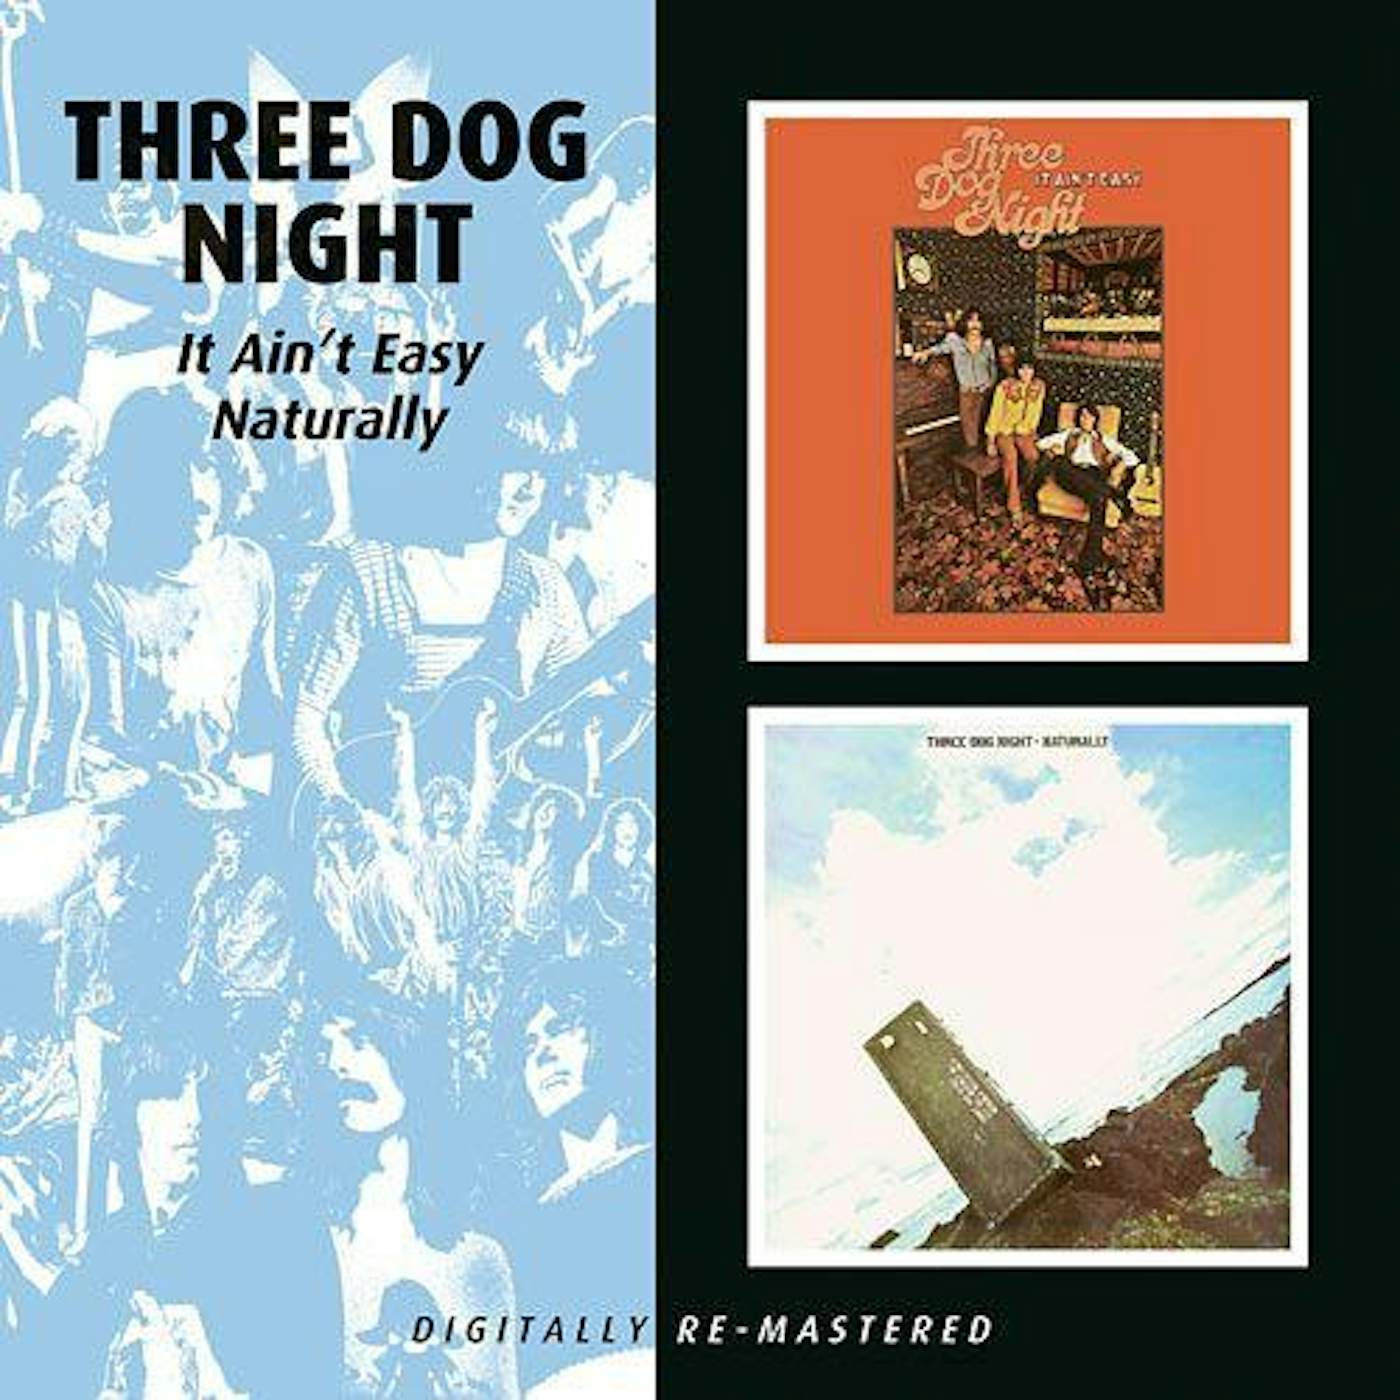 Three Dog Night IT AIN'T EASY / NATURALLY (REMASTERED) CD